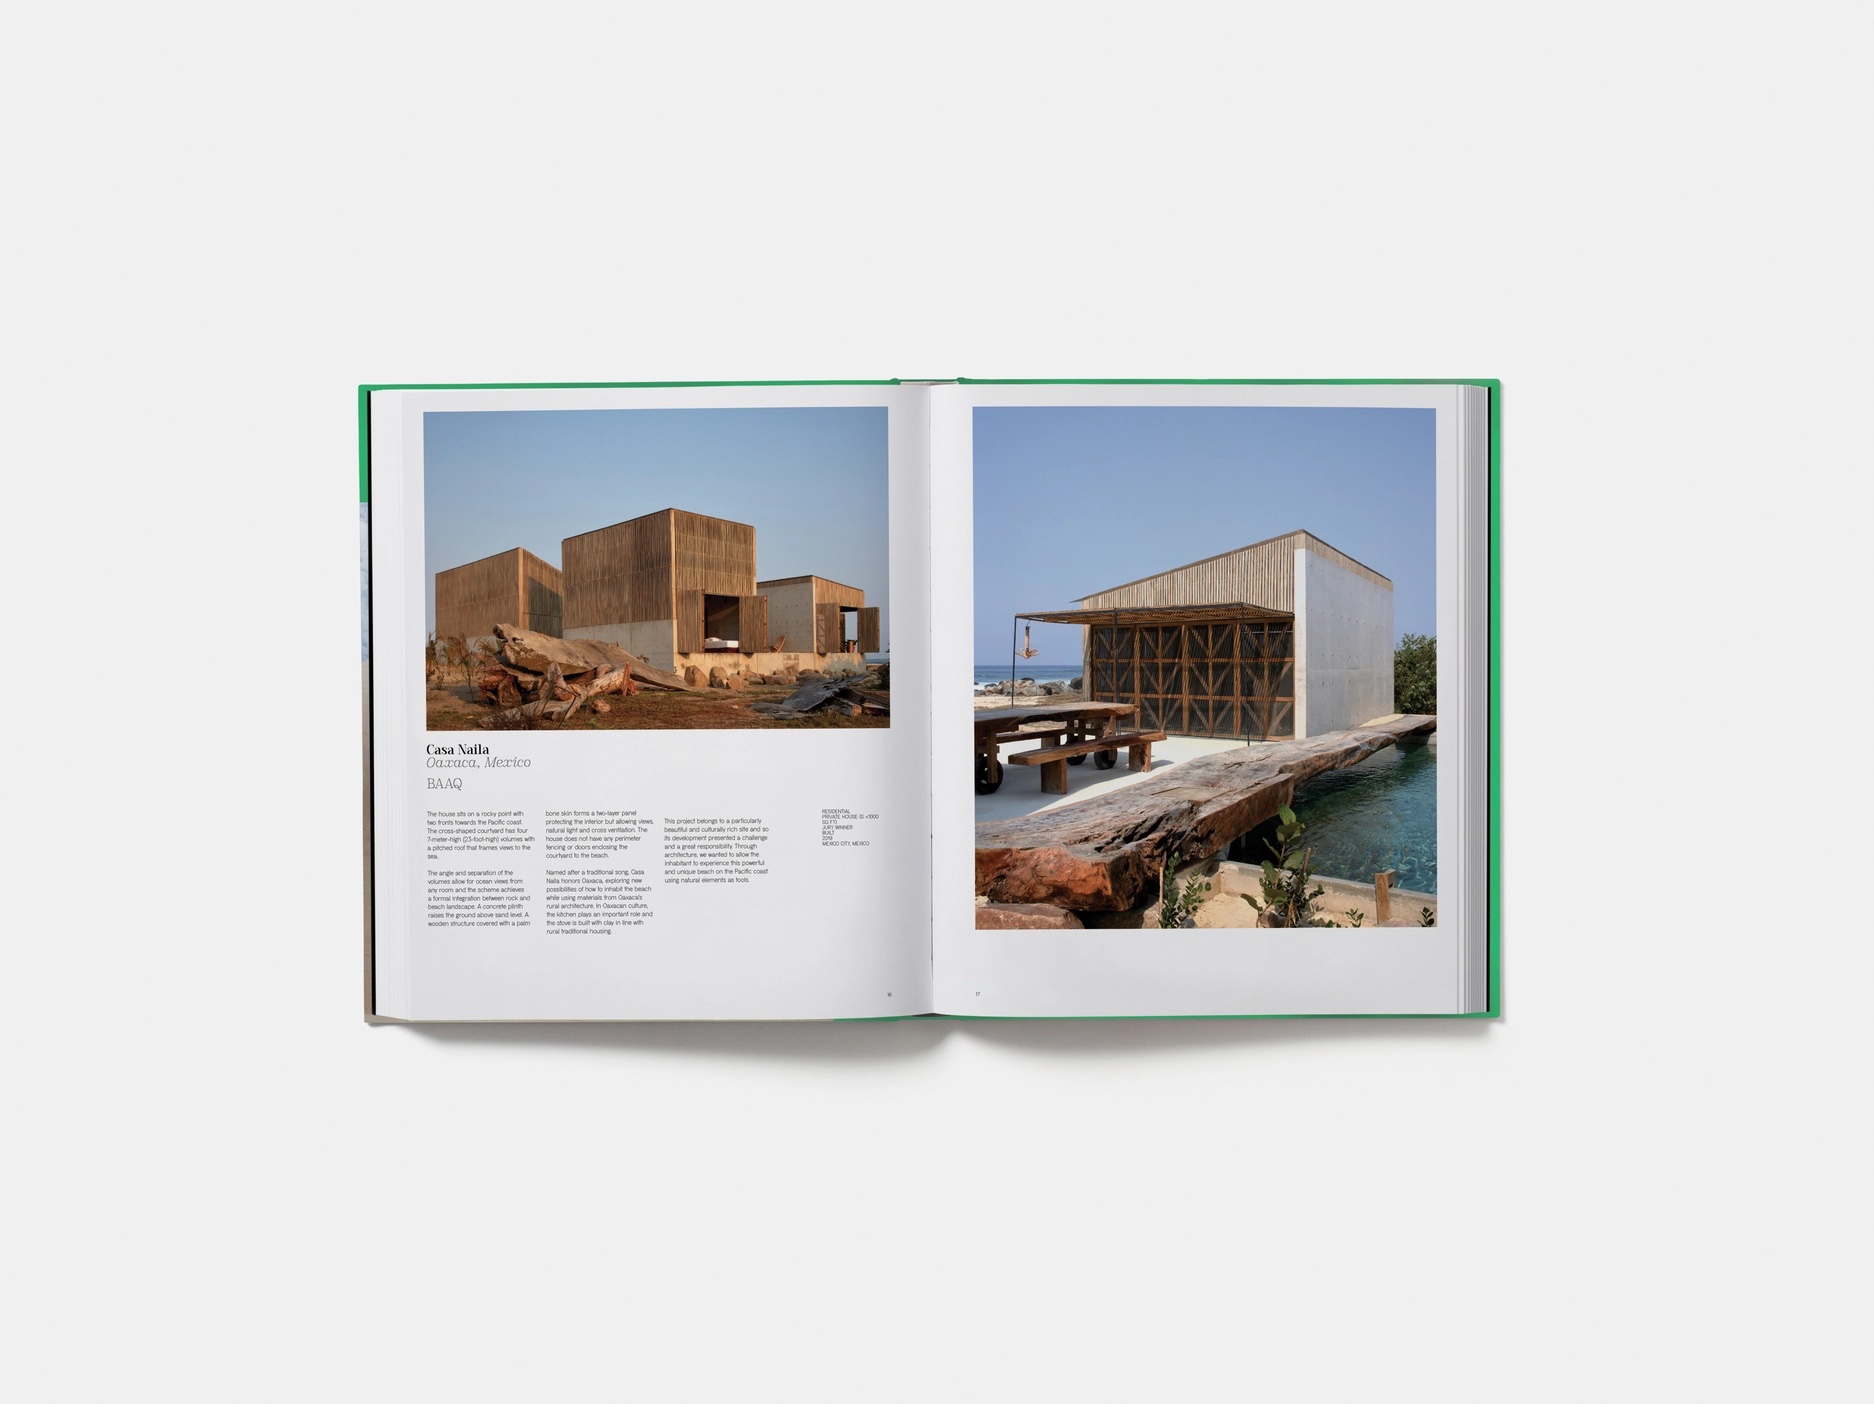 Phaidon "The World's Best Architecture" Volume Architizer A+Awards Book 